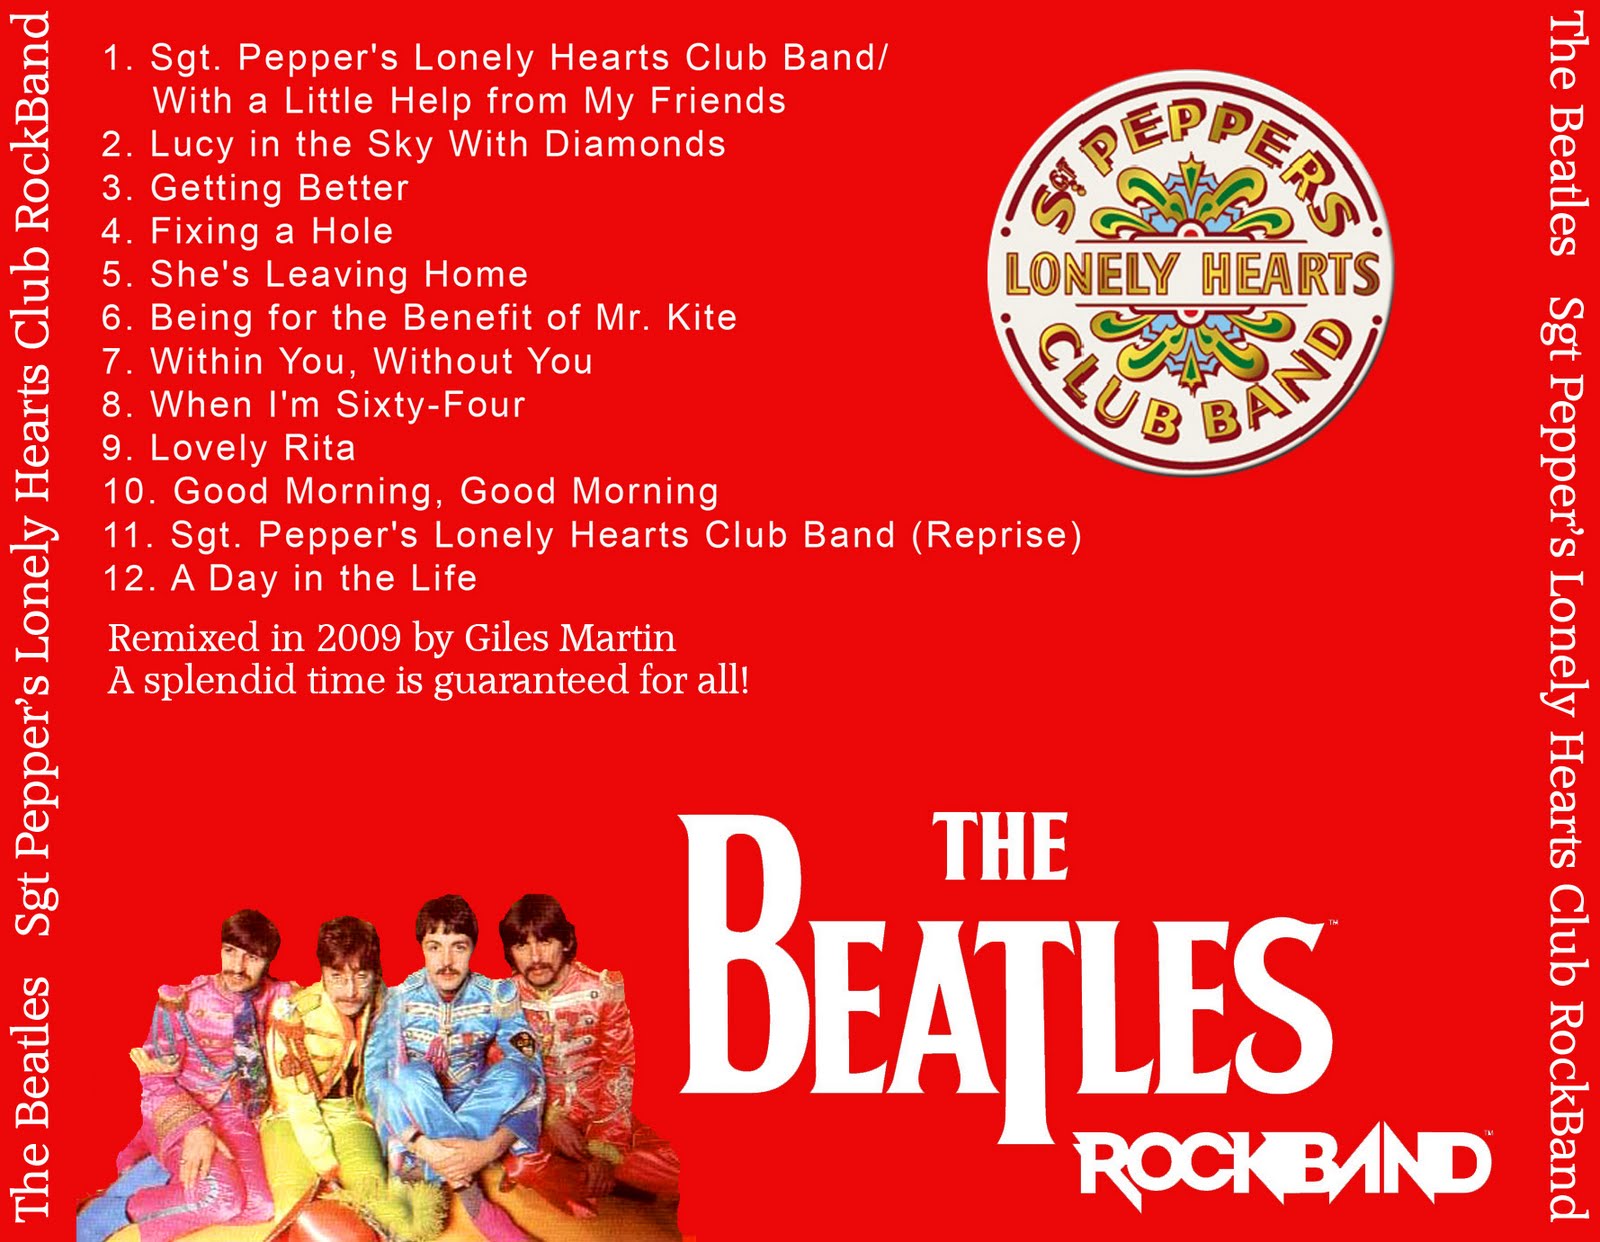 Beatles sgt pepper lonely. Sgt Pepper's Lonely Hearts Club Band. Sgt Pepper's Lonely Hearts Club Band album Cover. The Beatles Sgt. Pepper's Lonely Hearts Club Band 1967. Sgt. Pepper's Lonely Hearts Club Band CD.